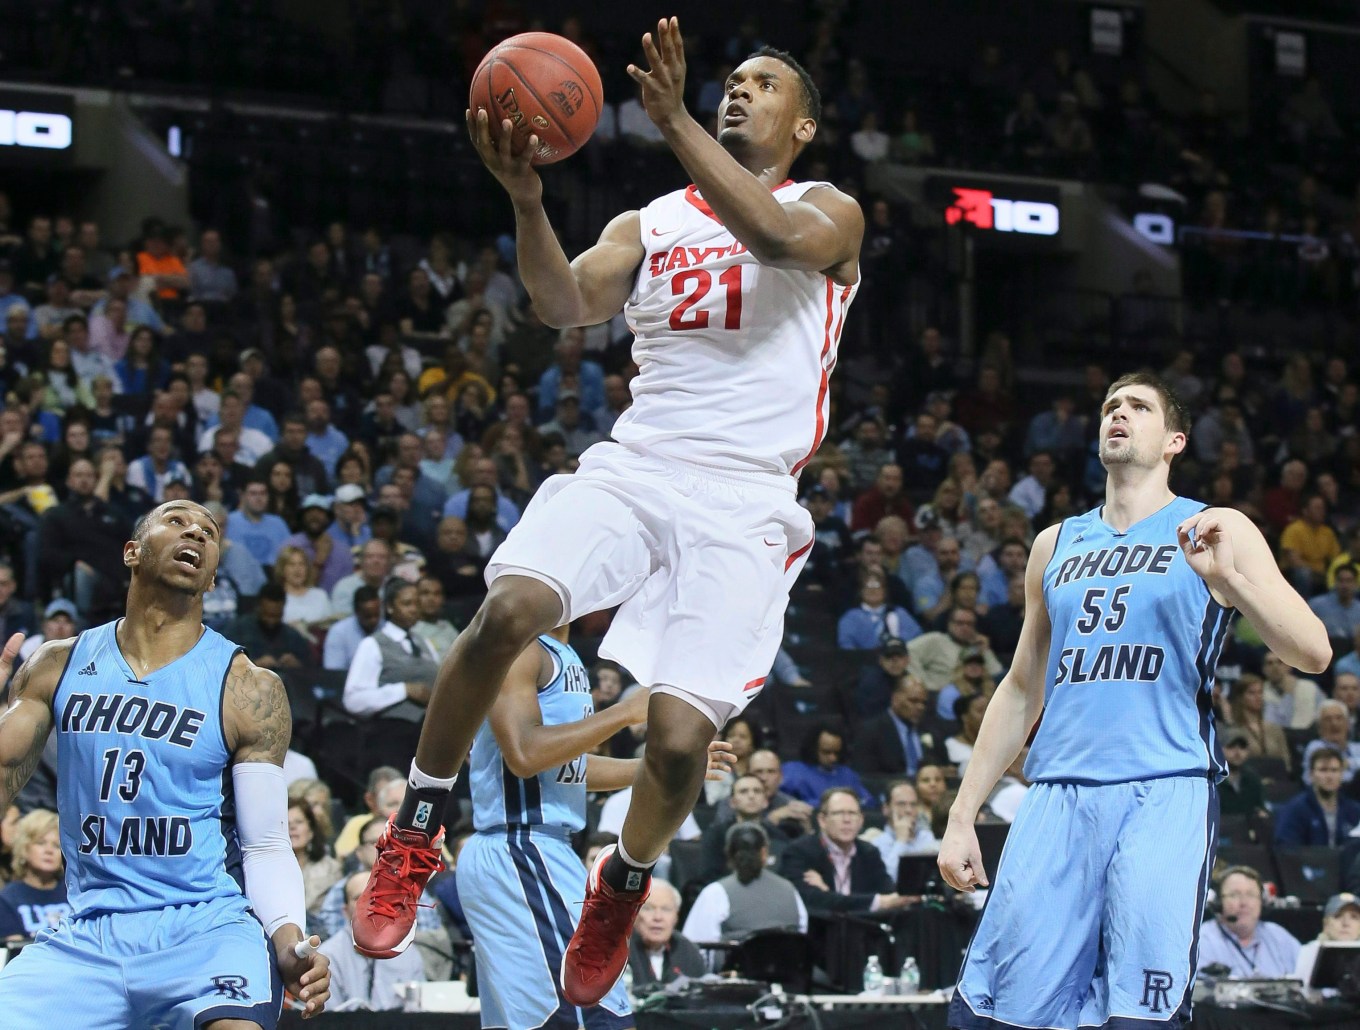 Dayton forward Dyshawn Pierre (21) shoots as Rhode Island guard T.J. Buchanan (13) and forward Gilvydas Biruta (55) look on during the first half of an NCAA college basketball game in the semifinals of the Atlantic 10 Conference tournament in New York, Saturday, March 14, 2015. (AP Photo/John Minchillo)